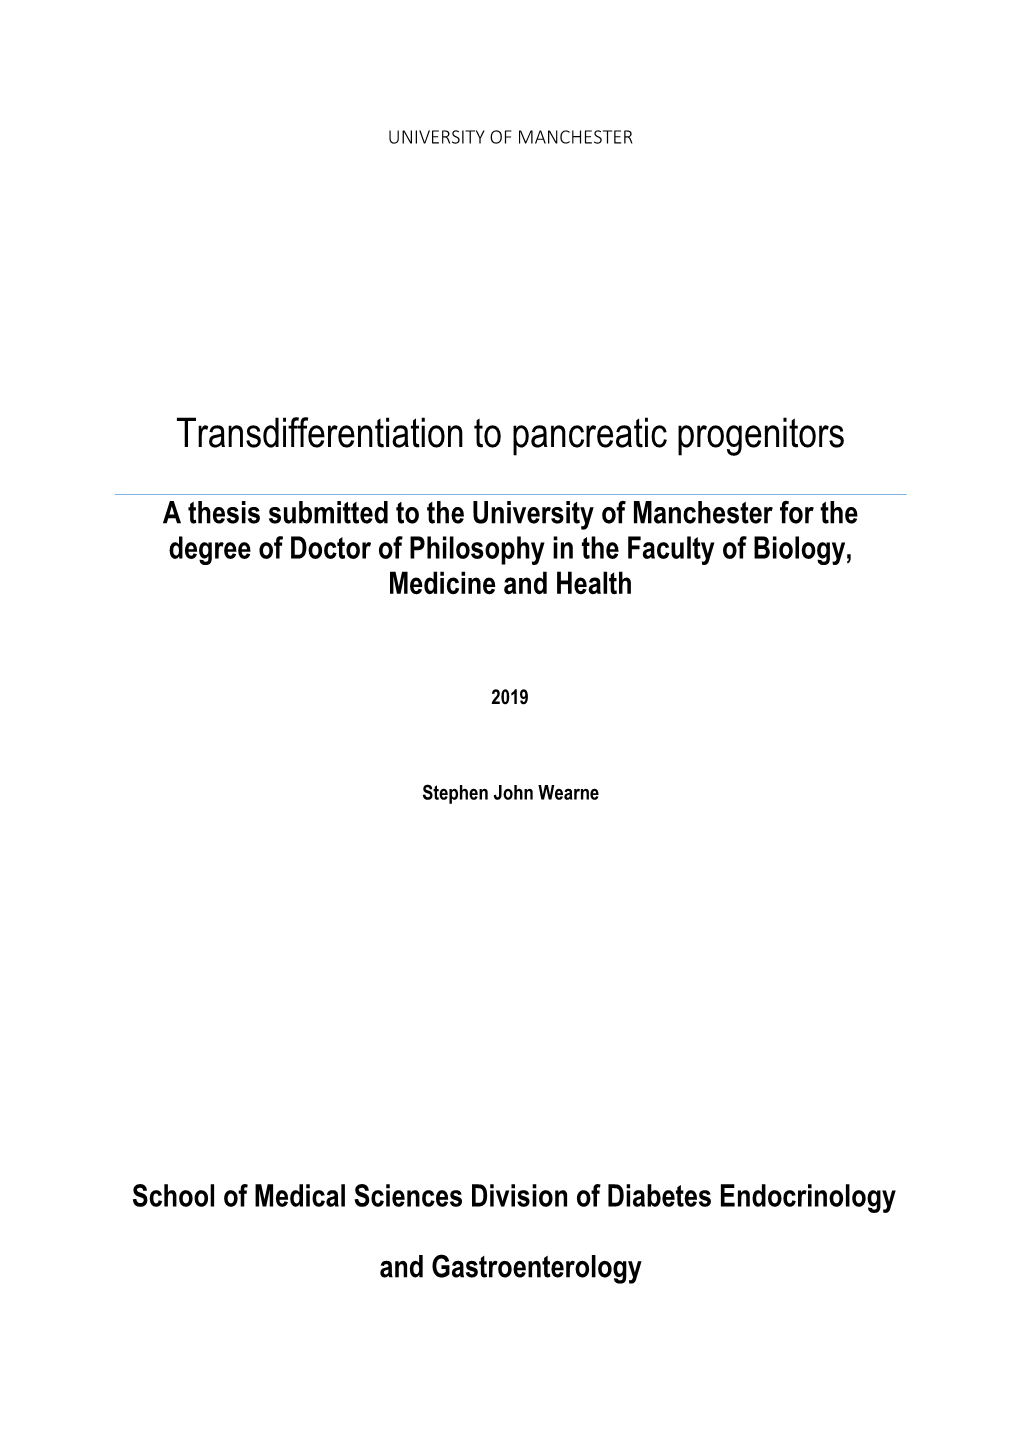 Transdifferentiation to Pancreatic Progenitors